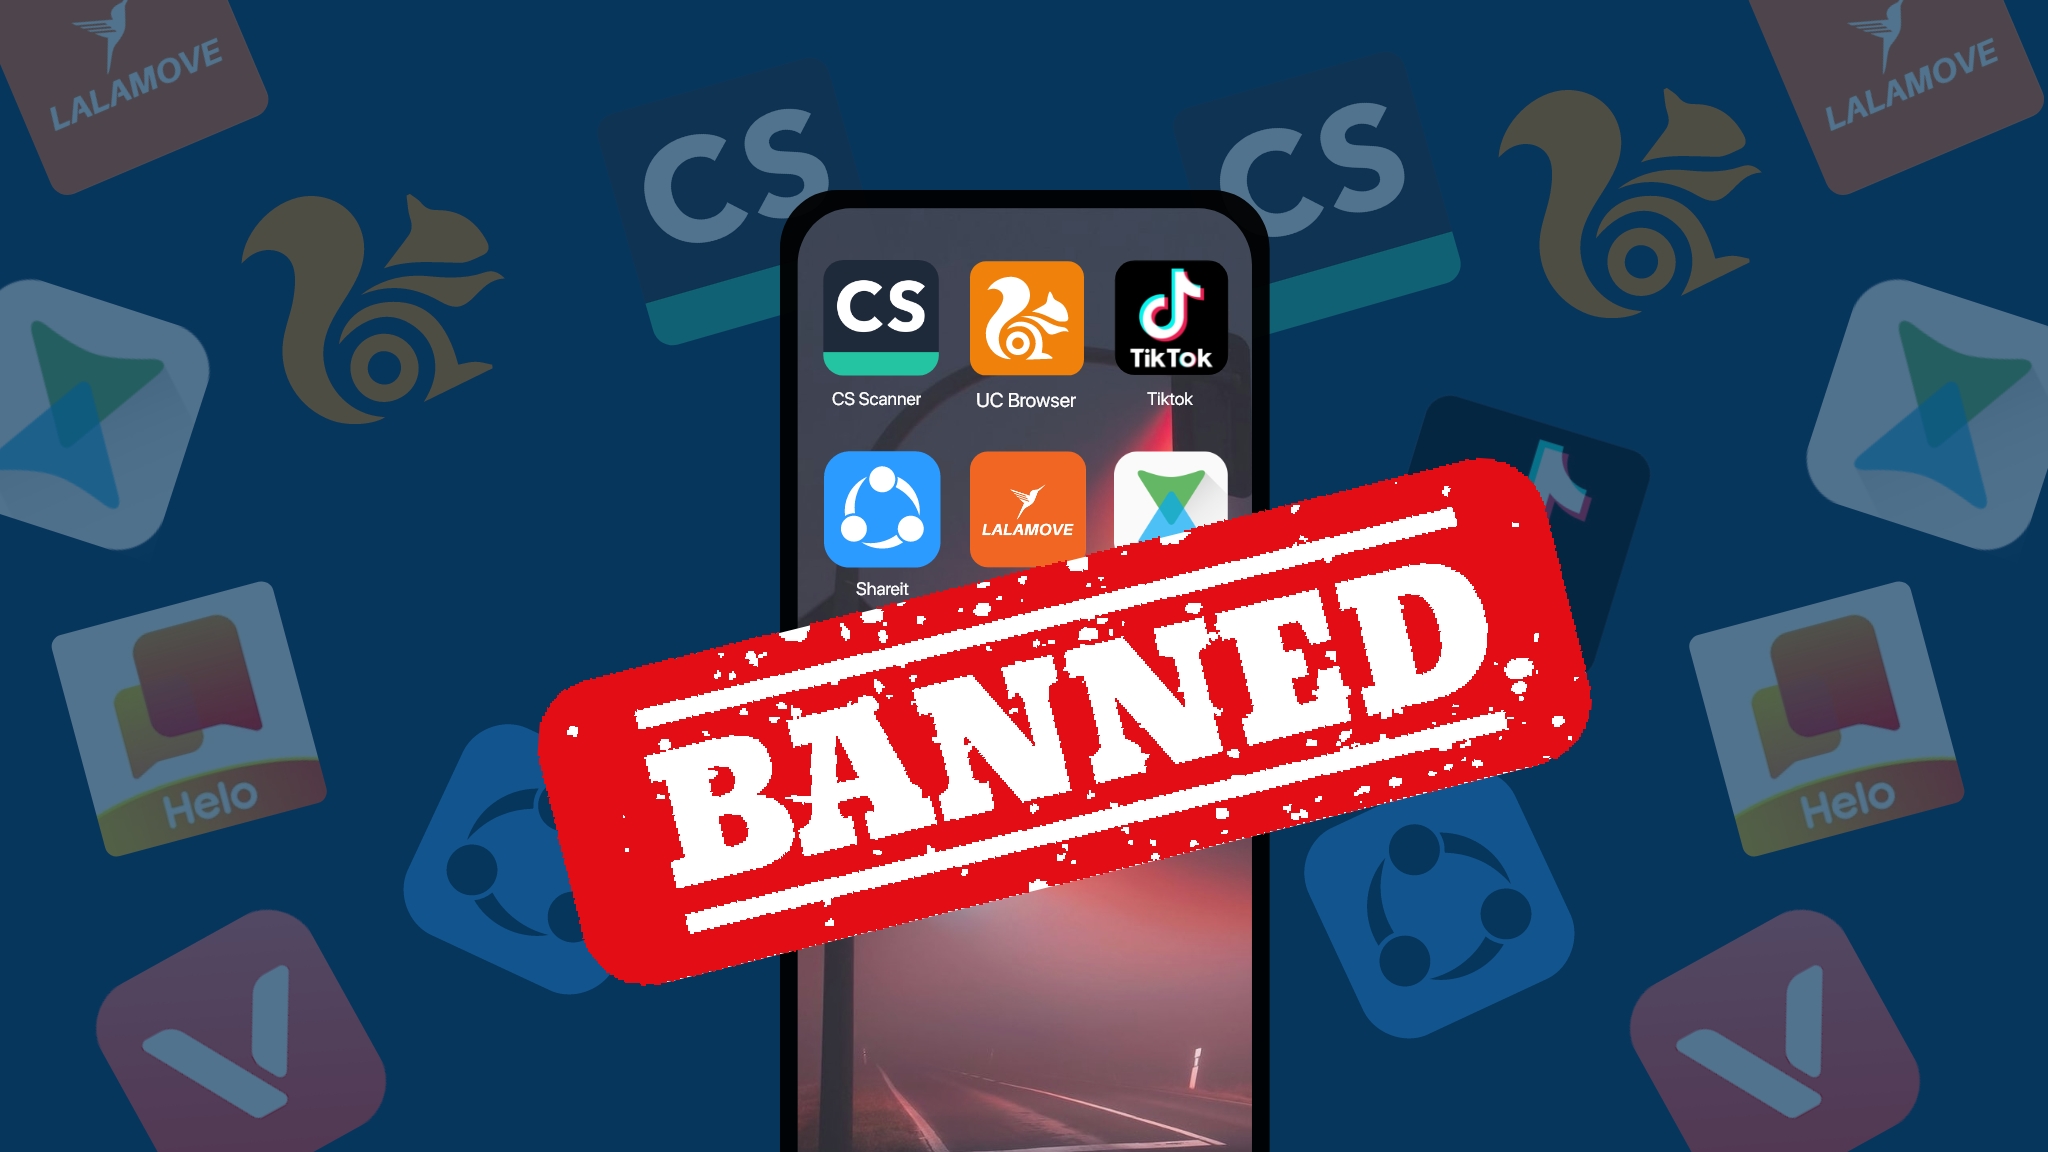 Chinese App Ban: An Opportunity to Make Your Own Mobile App?